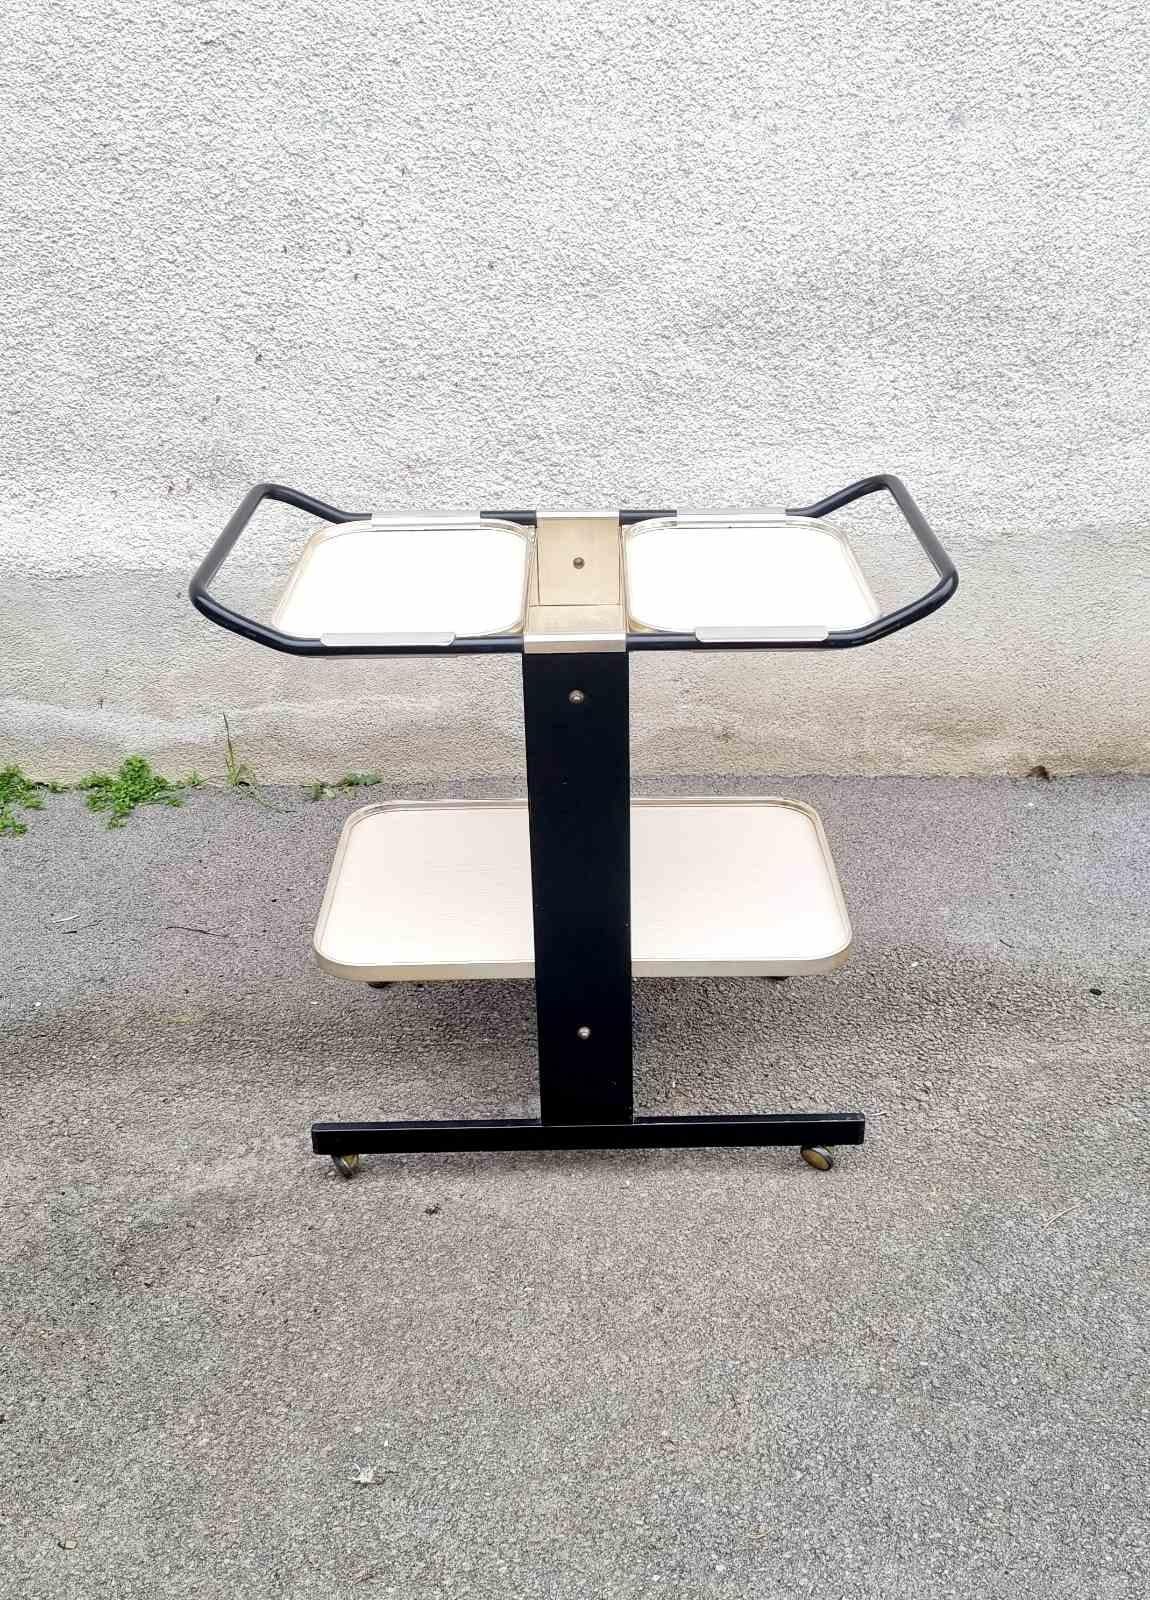 MCM Serving Trolley or Bar Cart Designed by Ico Parisi for MB Italia, 60s For Sale 4